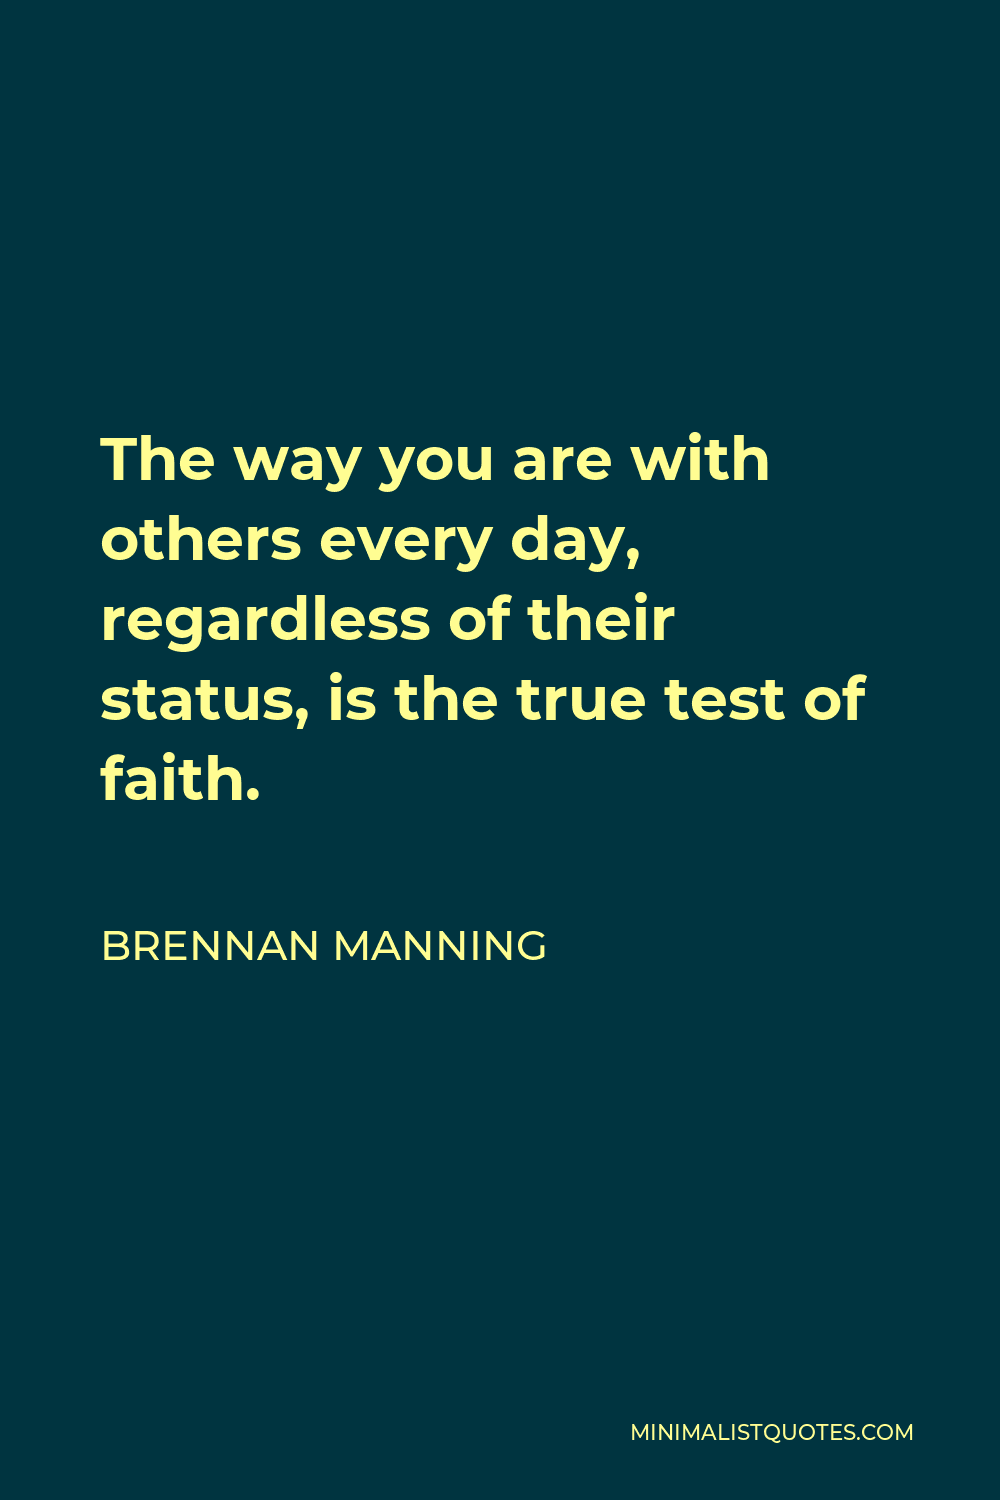 Brennan Manning Quote - The way you are with others every day, regardless of their status, is the true test of faith.